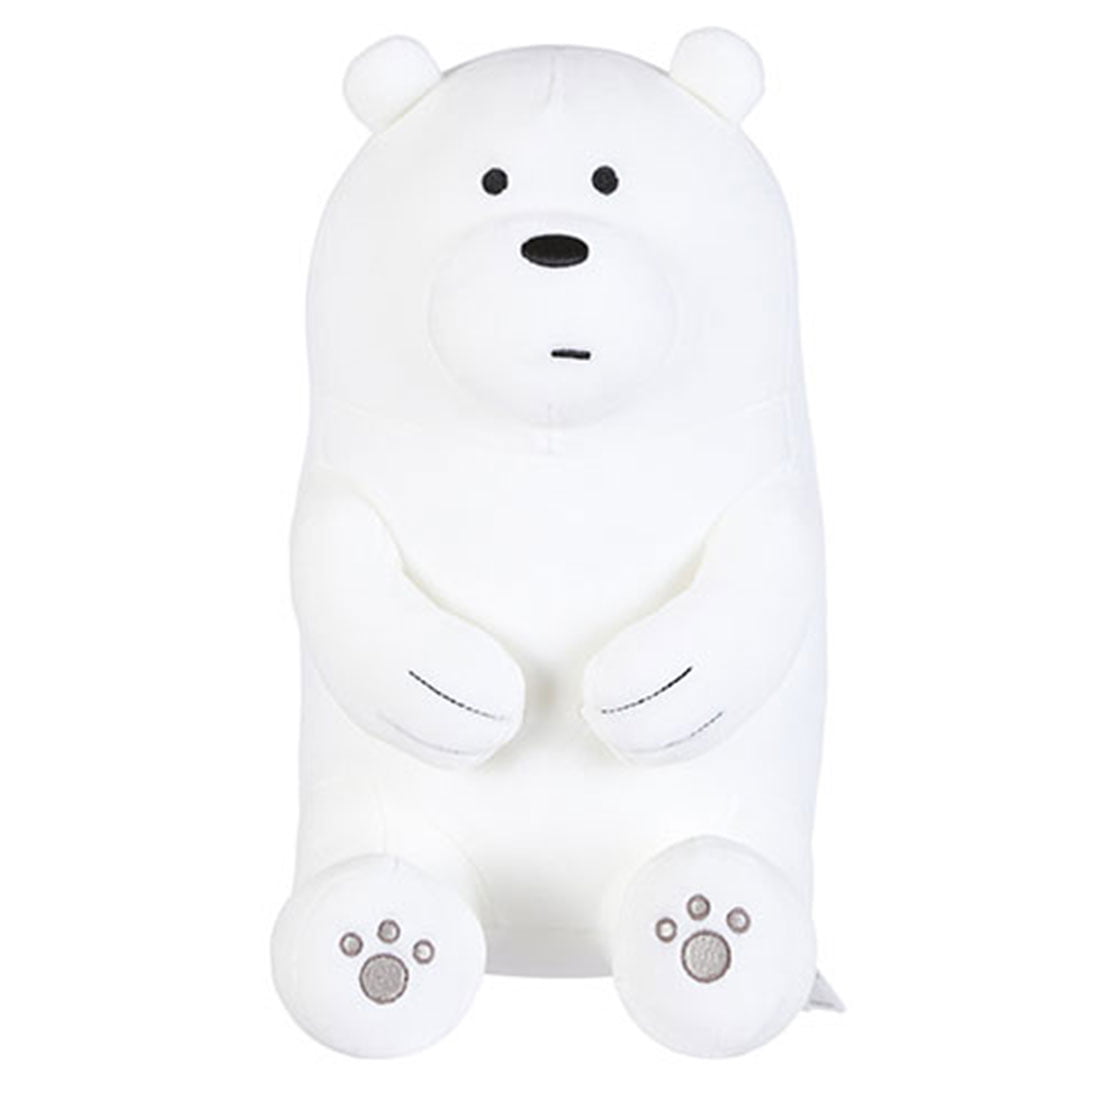 MINISO We Bare Bears Lovely Sitting Stuffed Plush Grizzly Stuffed Animals Kawaii Plushies Soft Plush Brown Pillow for Boys Girls Kids Toddler Toys Doll 